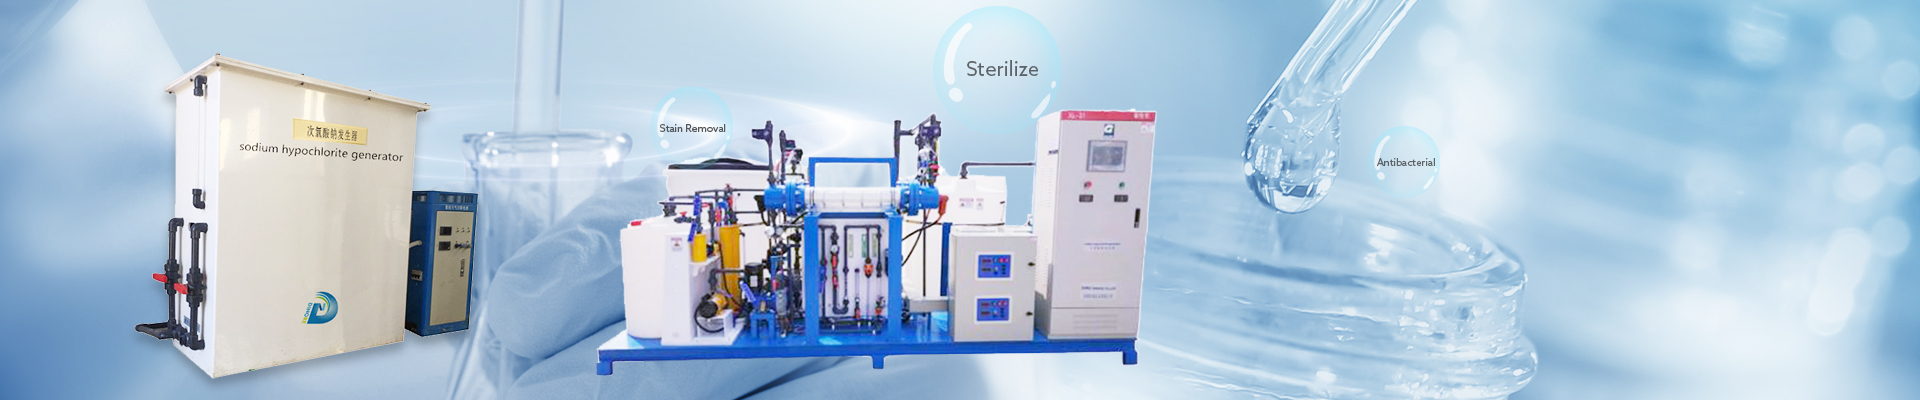 Automatic HClO disinfection generator